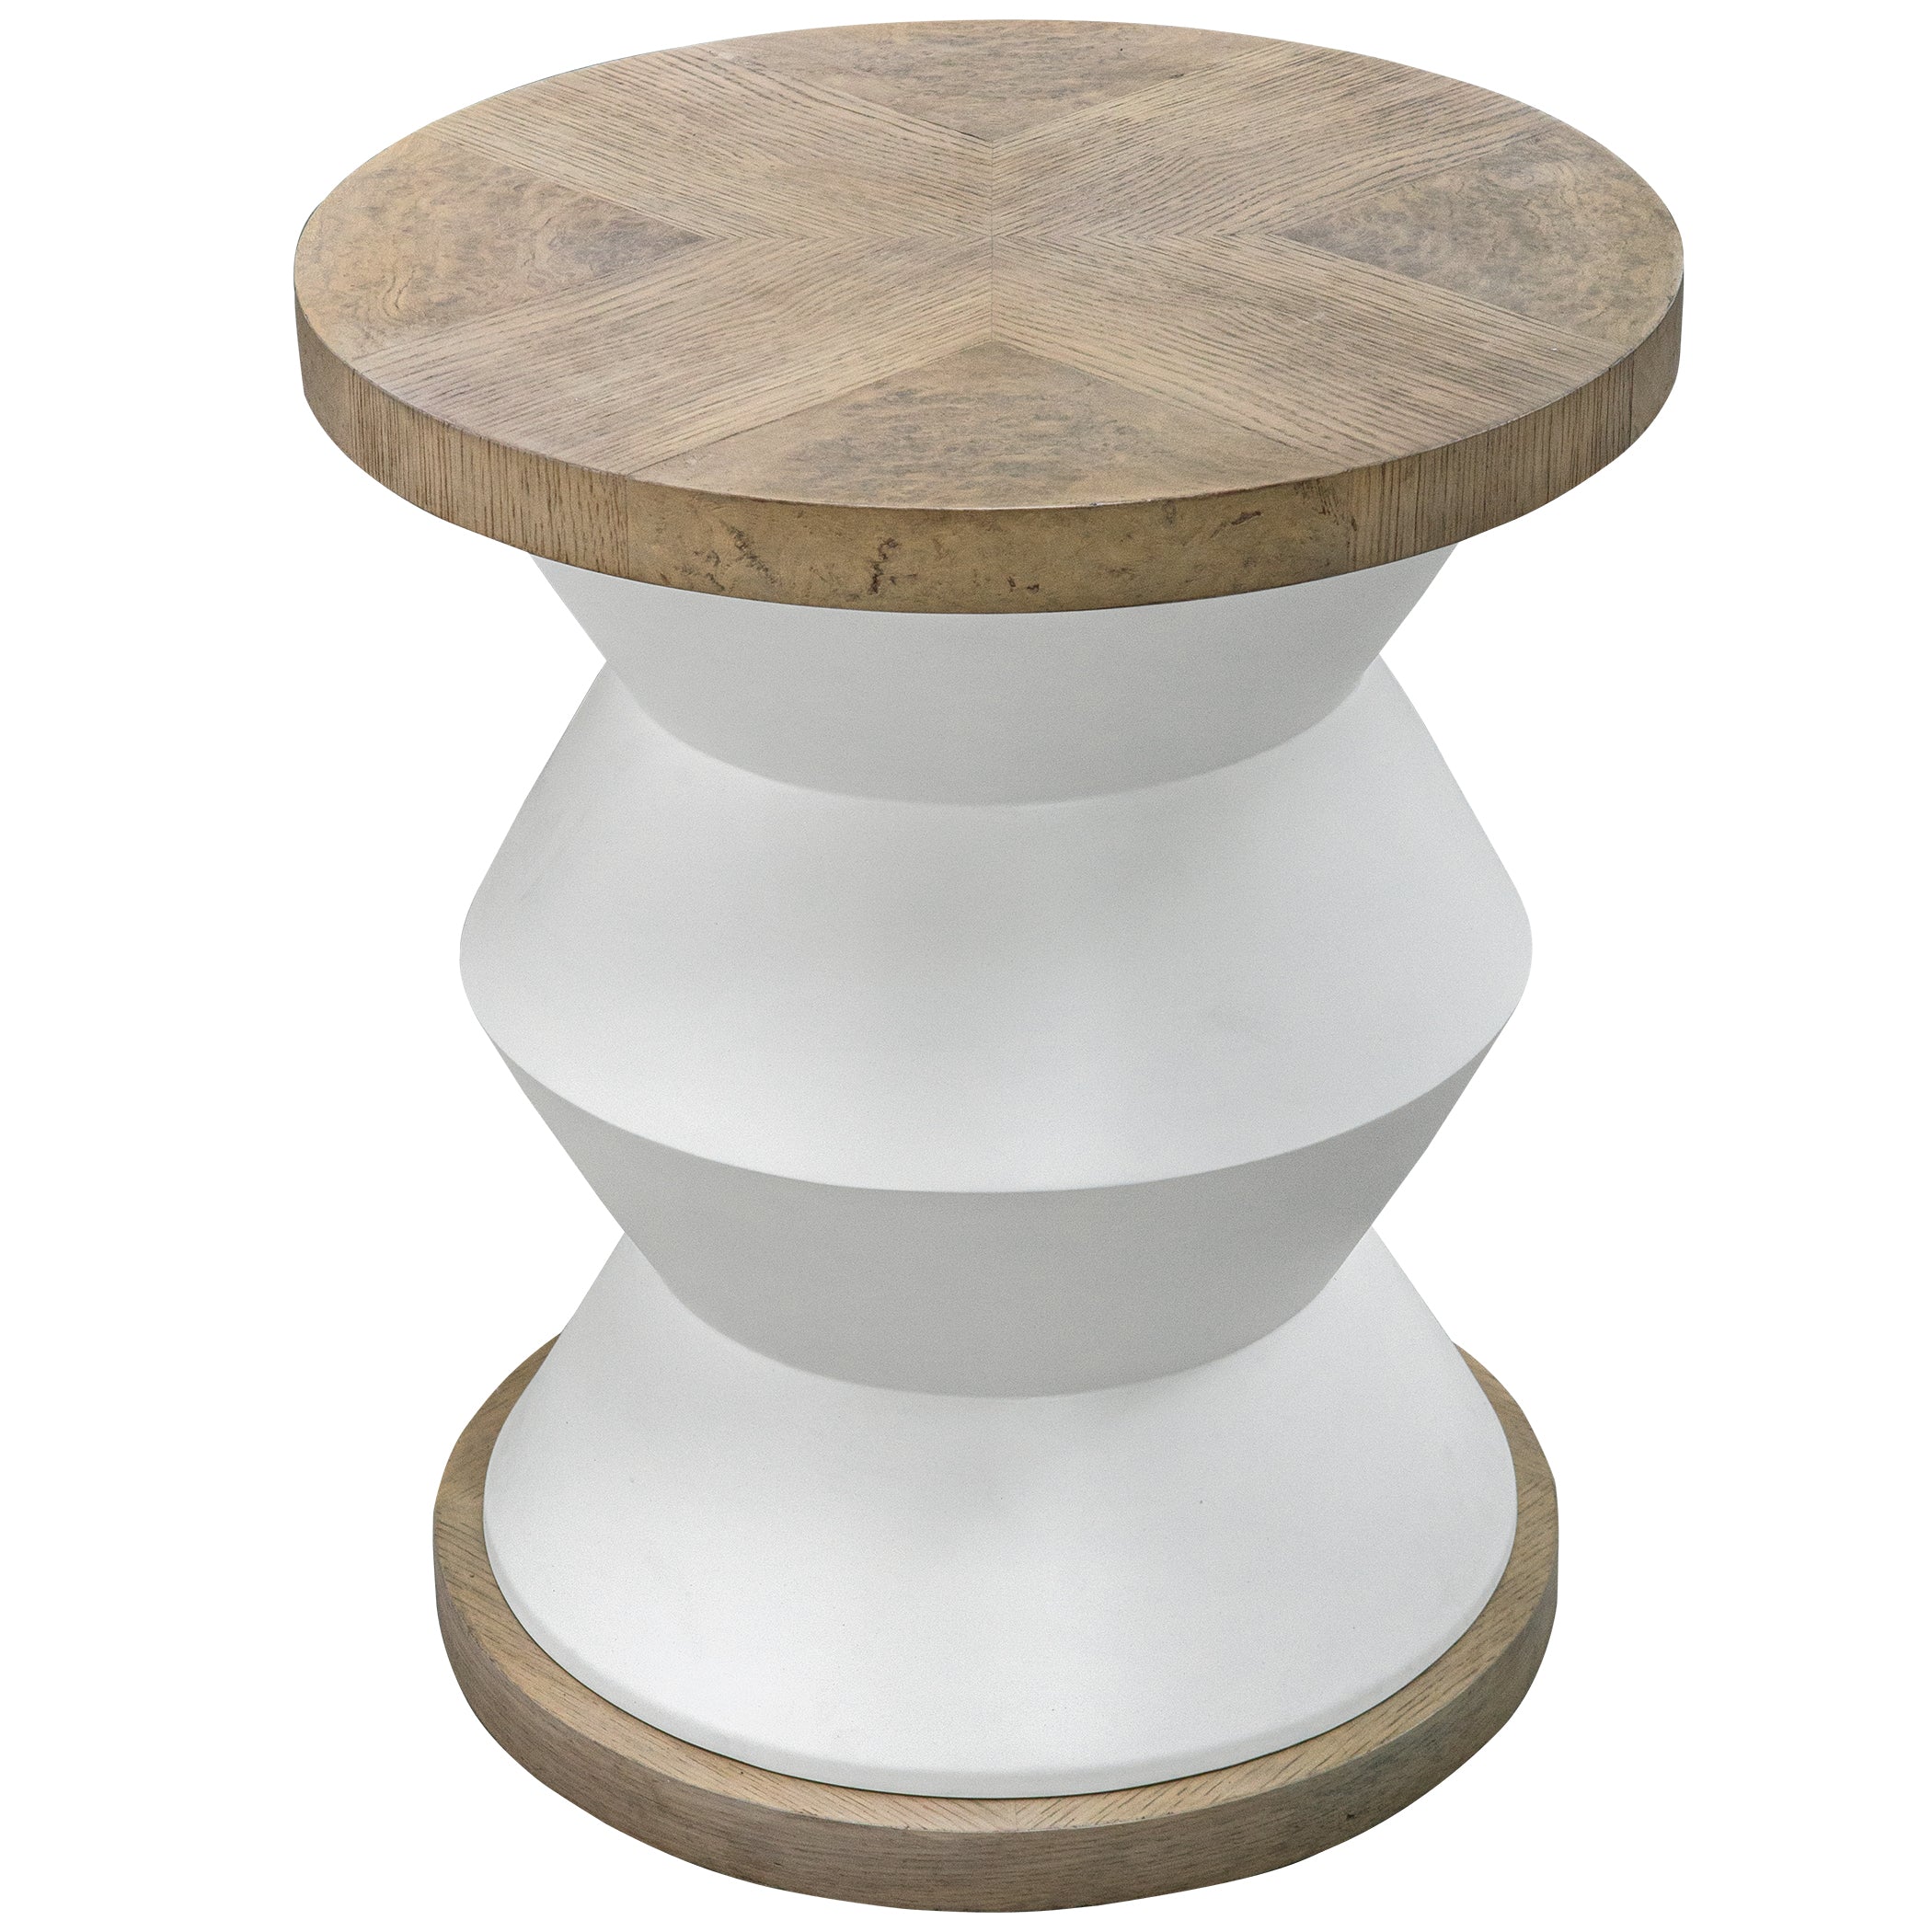 Uttermost Spool Accent & End Tables Accent & End Tables Uttermost   